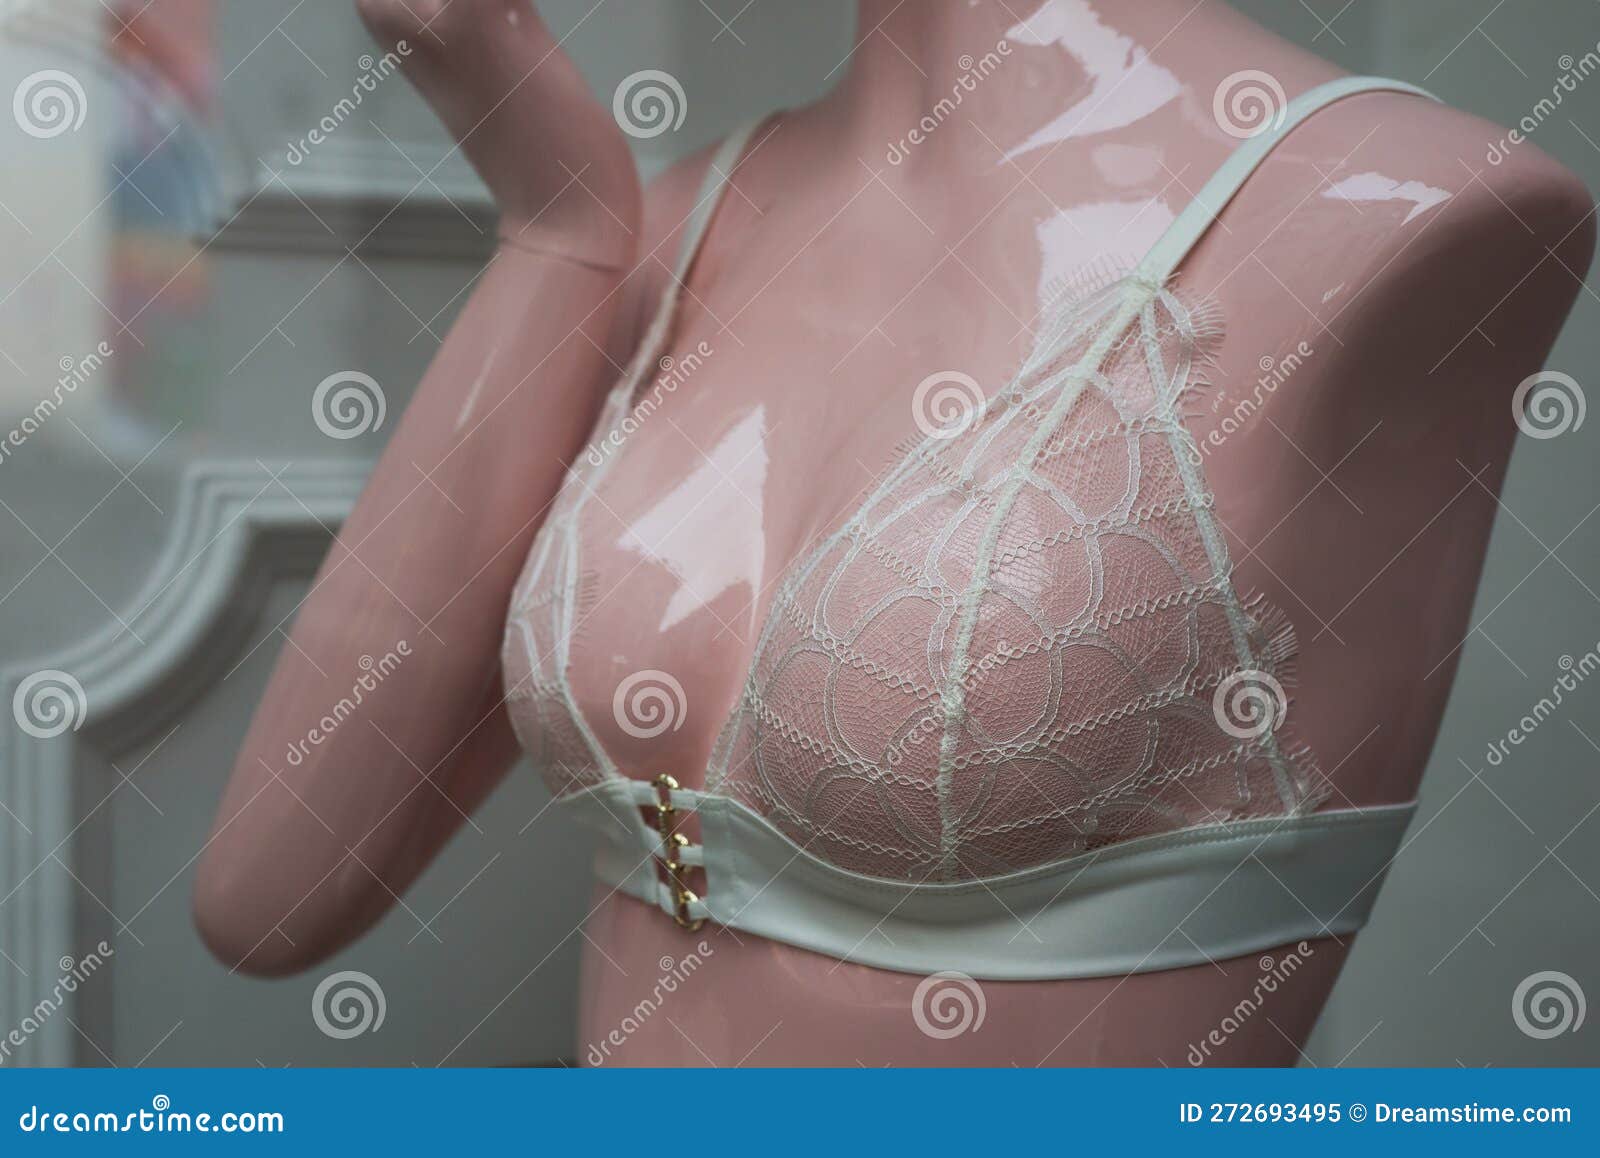 Satin Underwear on Mannequin in Fashion Store Showroom for Women Stock  Image - Image of lingerie, health: 272693495